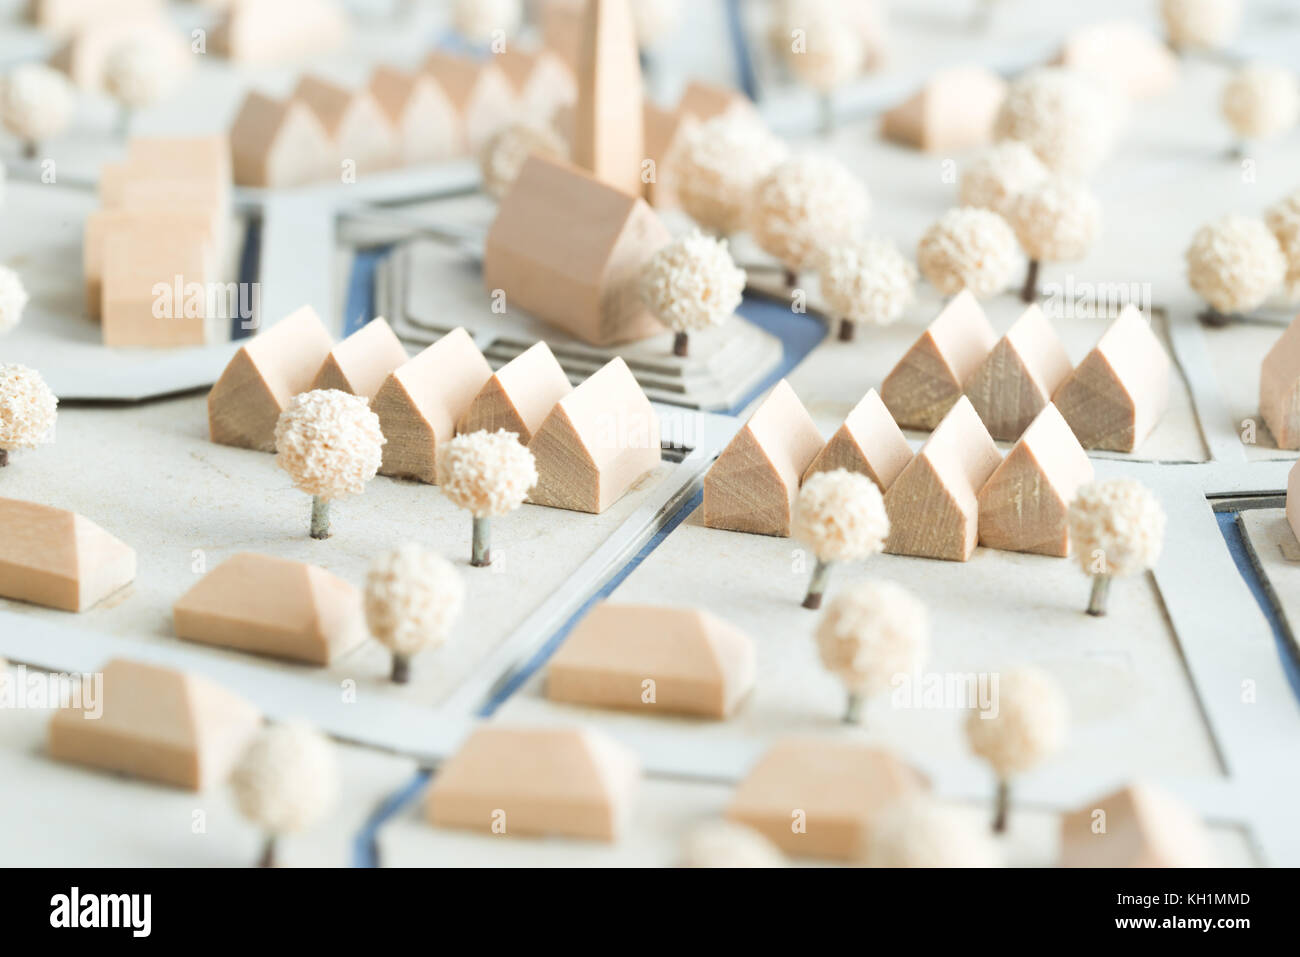 Model of a village Urbanism and Architecture Planning Stock Photo